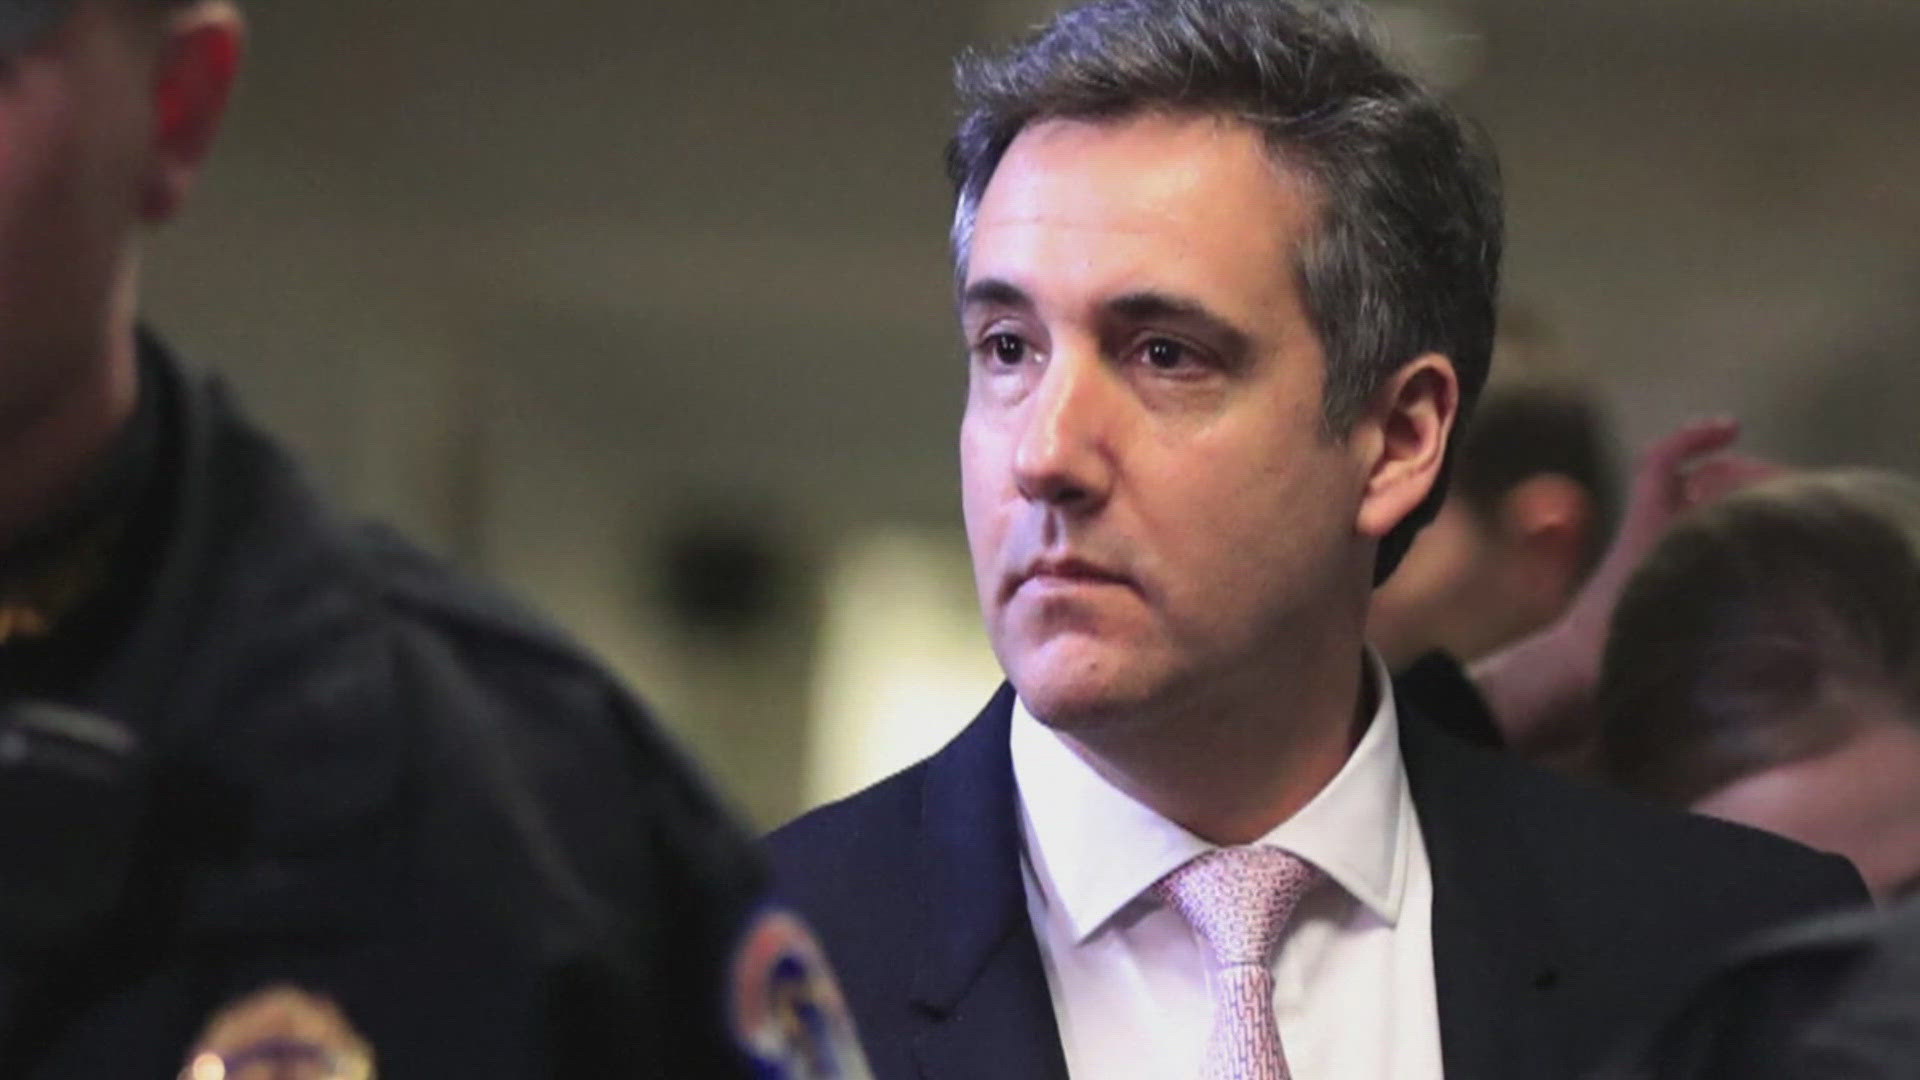 “Everything required Mr. Trump’s sign-off,” said Michael Cohen, Trump's fixer-turned-foe and the prosecution's star witness.